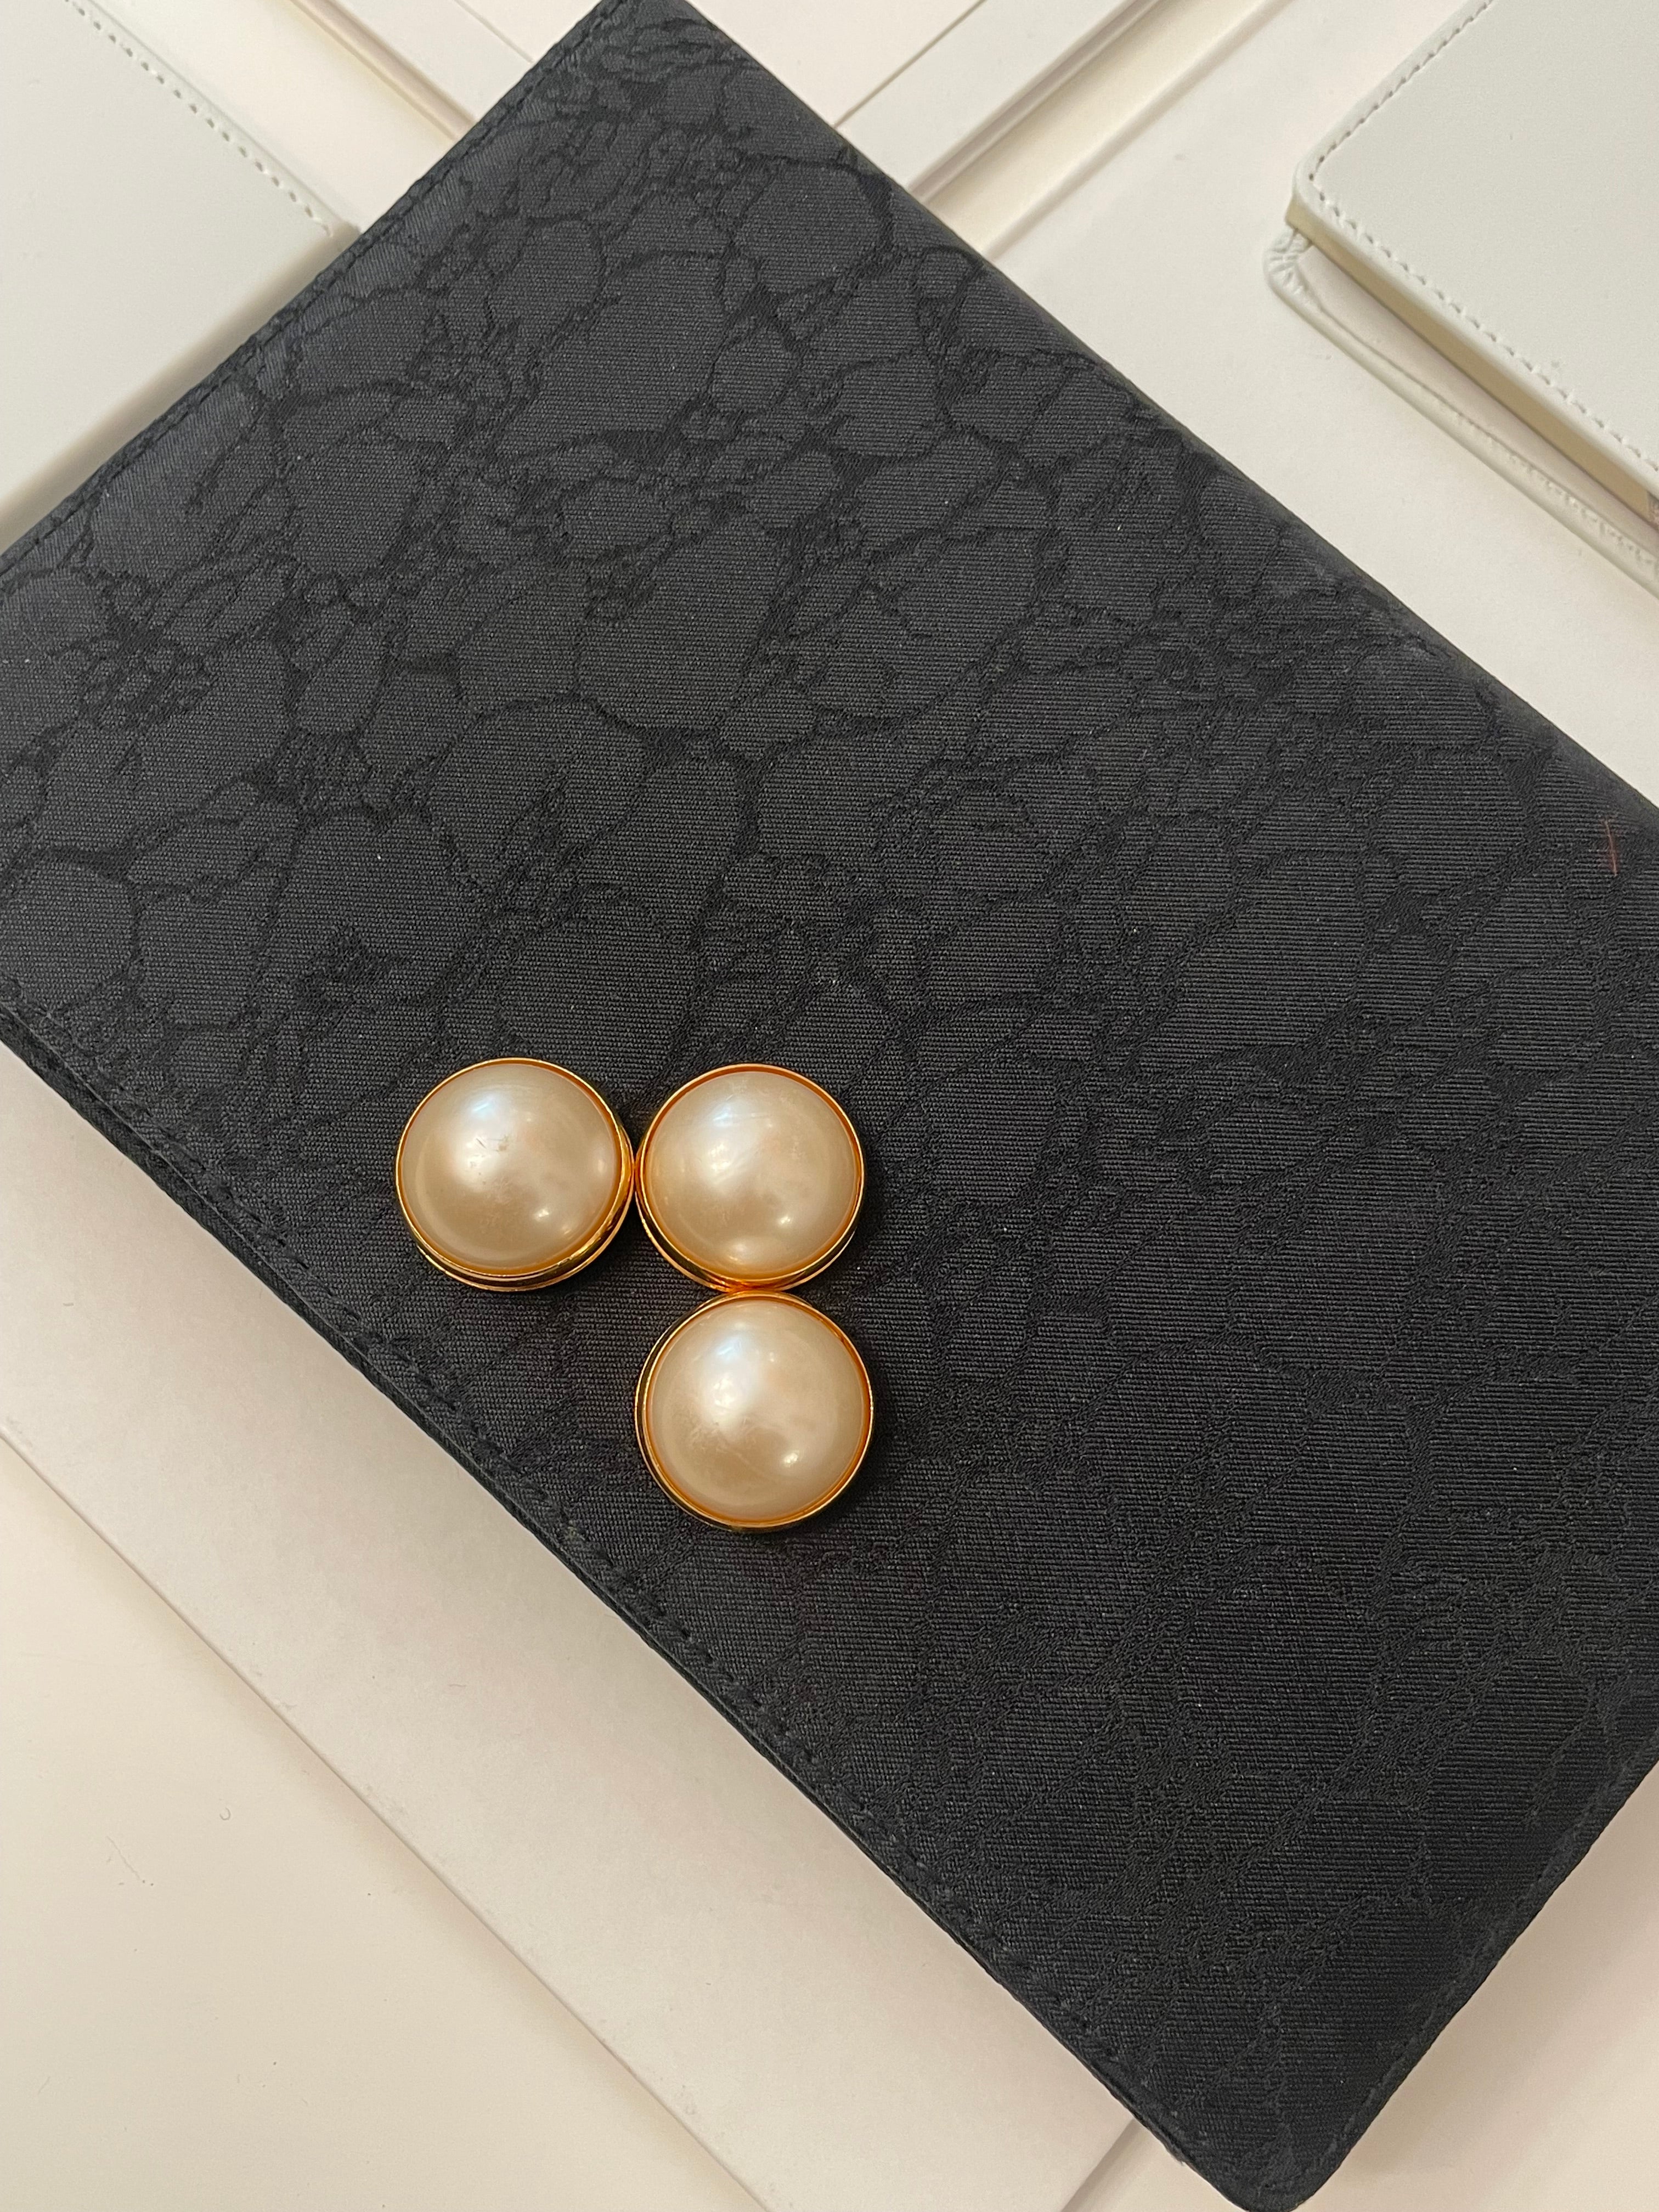 Isn't she charming delightful noir clutch bag, adorned with large pearls.... so elegant